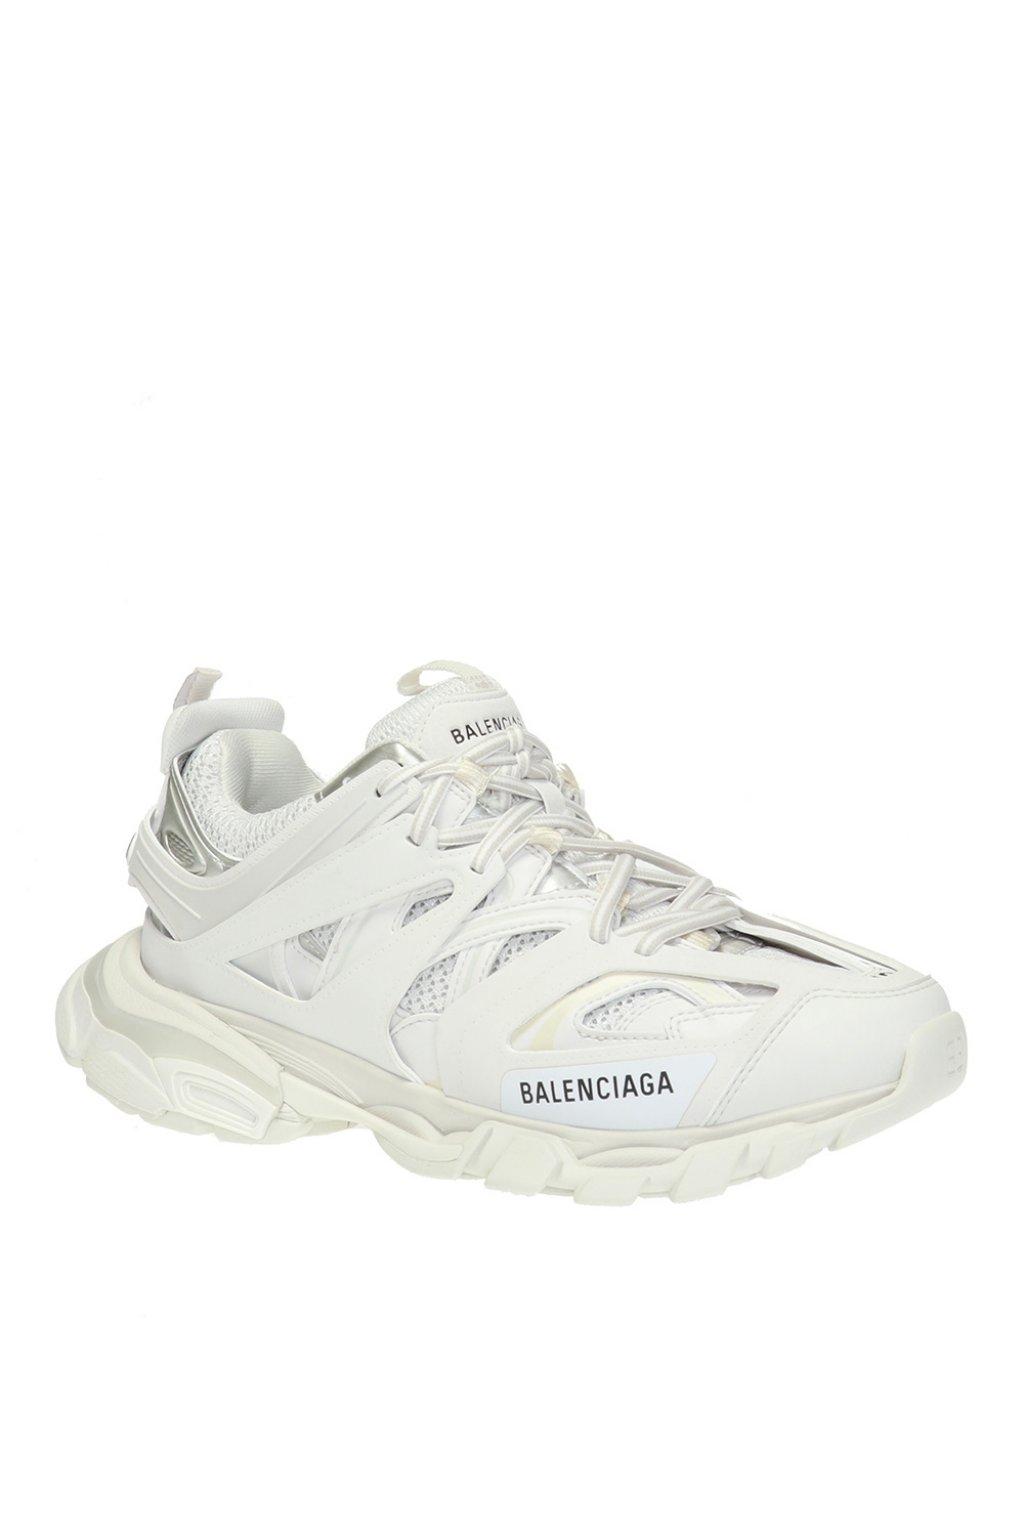 Balenciaga Truck Sneakers In Leather And Micro-mesh With Oversized Sole ...